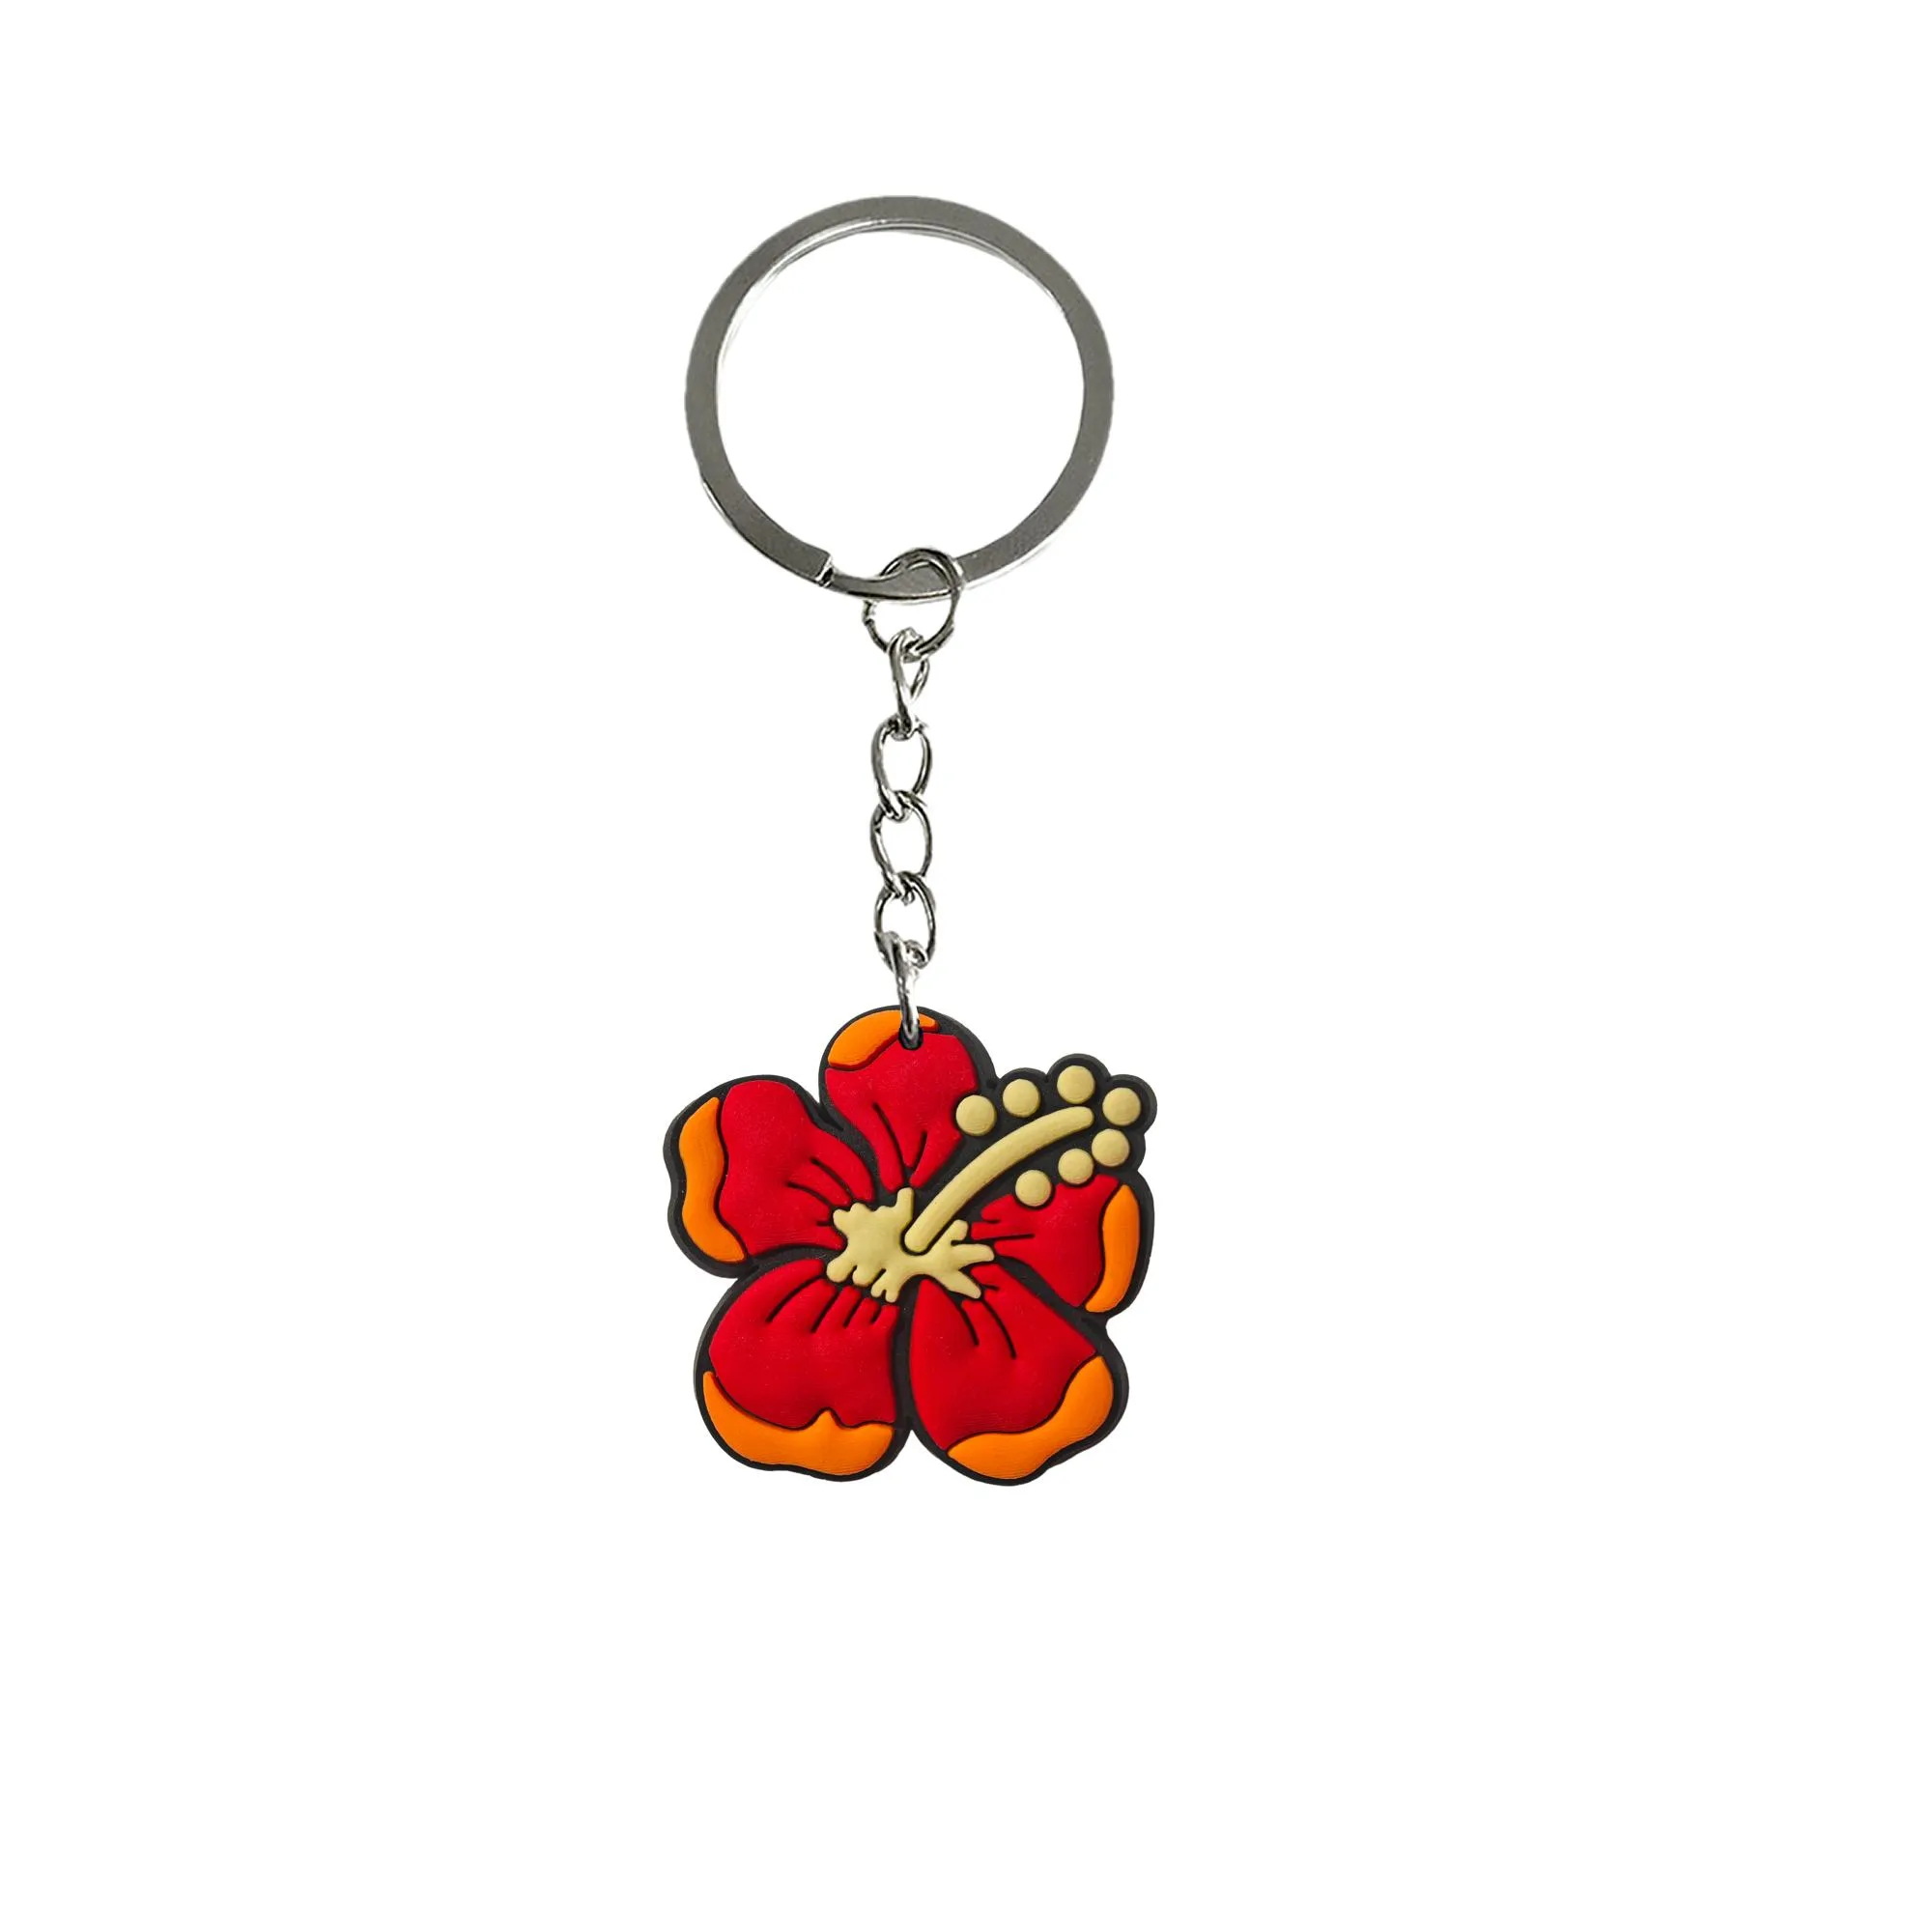 pentapetal flower keychain for goodie bag stuffers supplies keychains girls boys keyring suitable schoolbag backpack car charms women school day birthday party gift